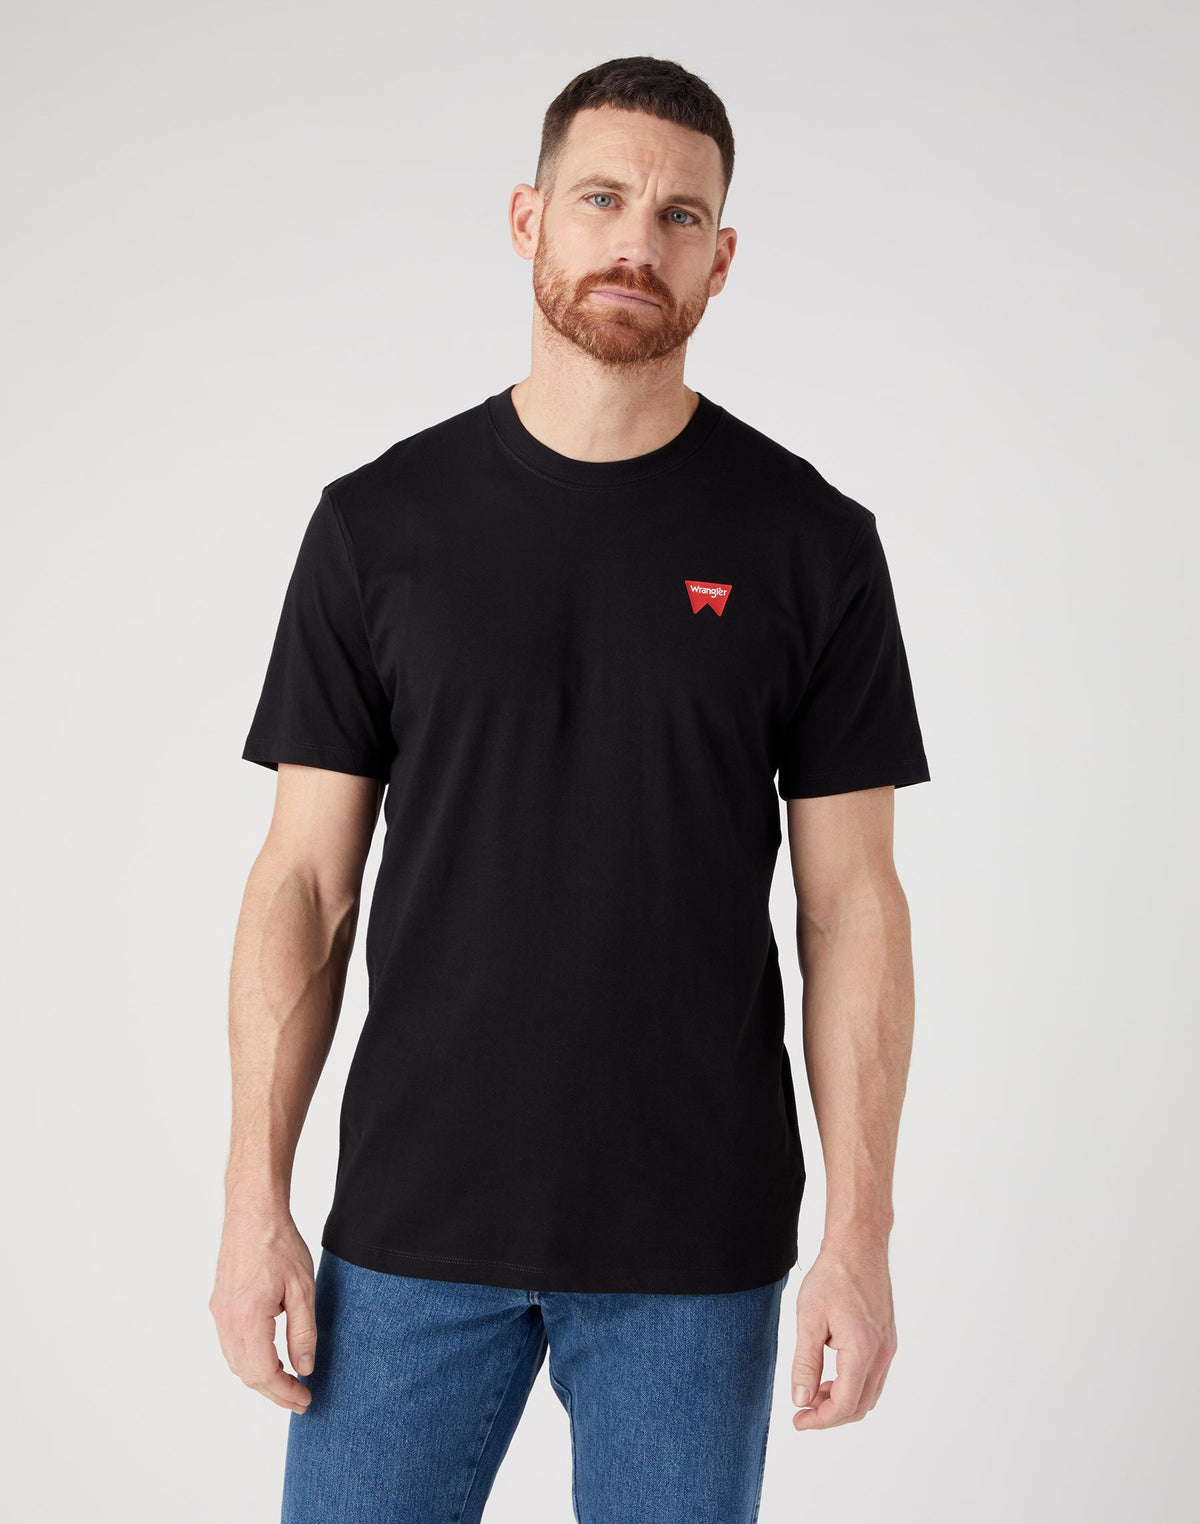 Sign Off Tee in Black